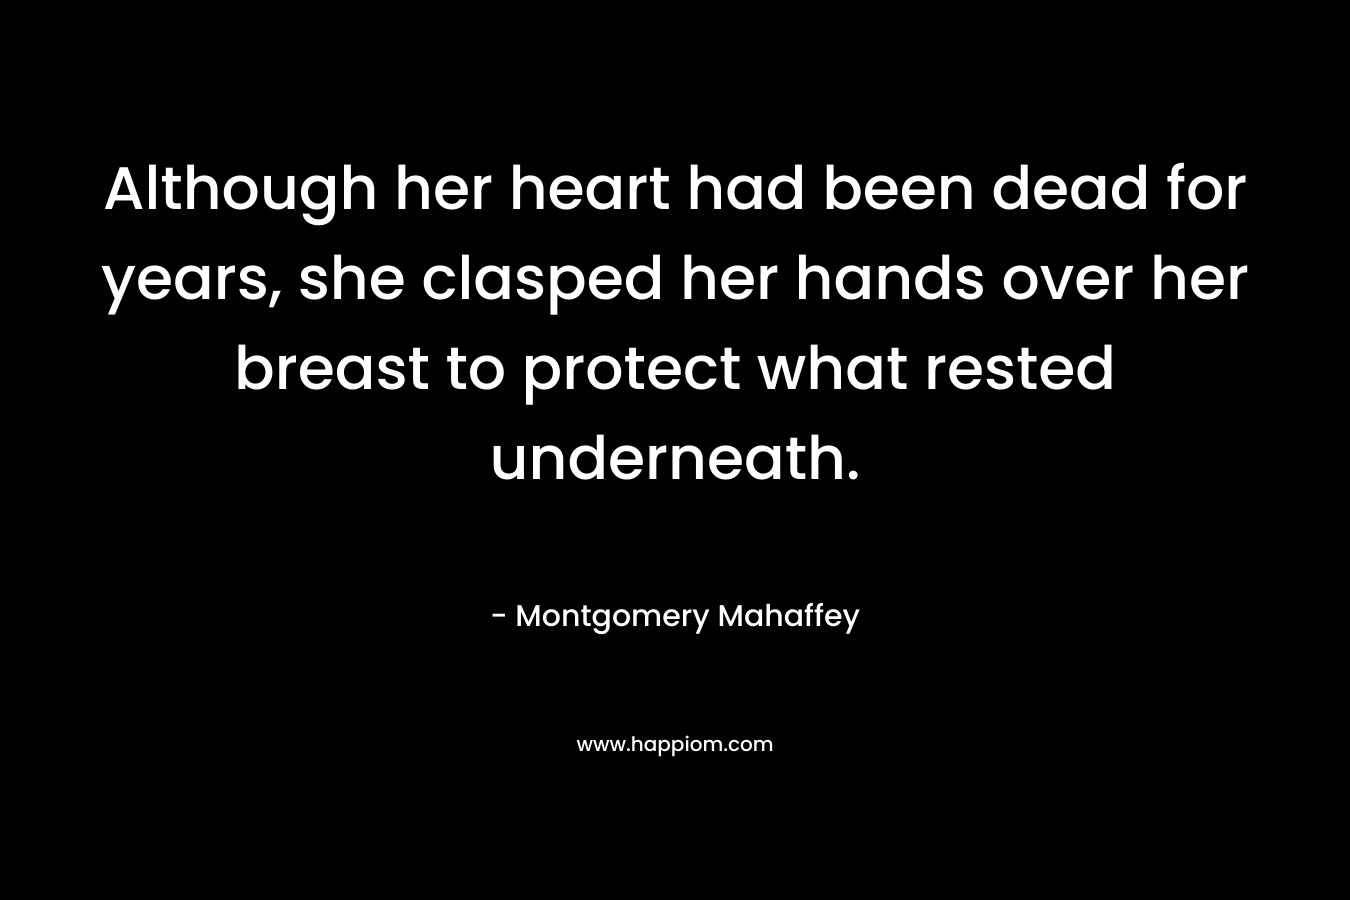 Although her heart had been dead for years, she clasped her hands over her breast to protect what rested underneath. – Montgomery Mahaffey